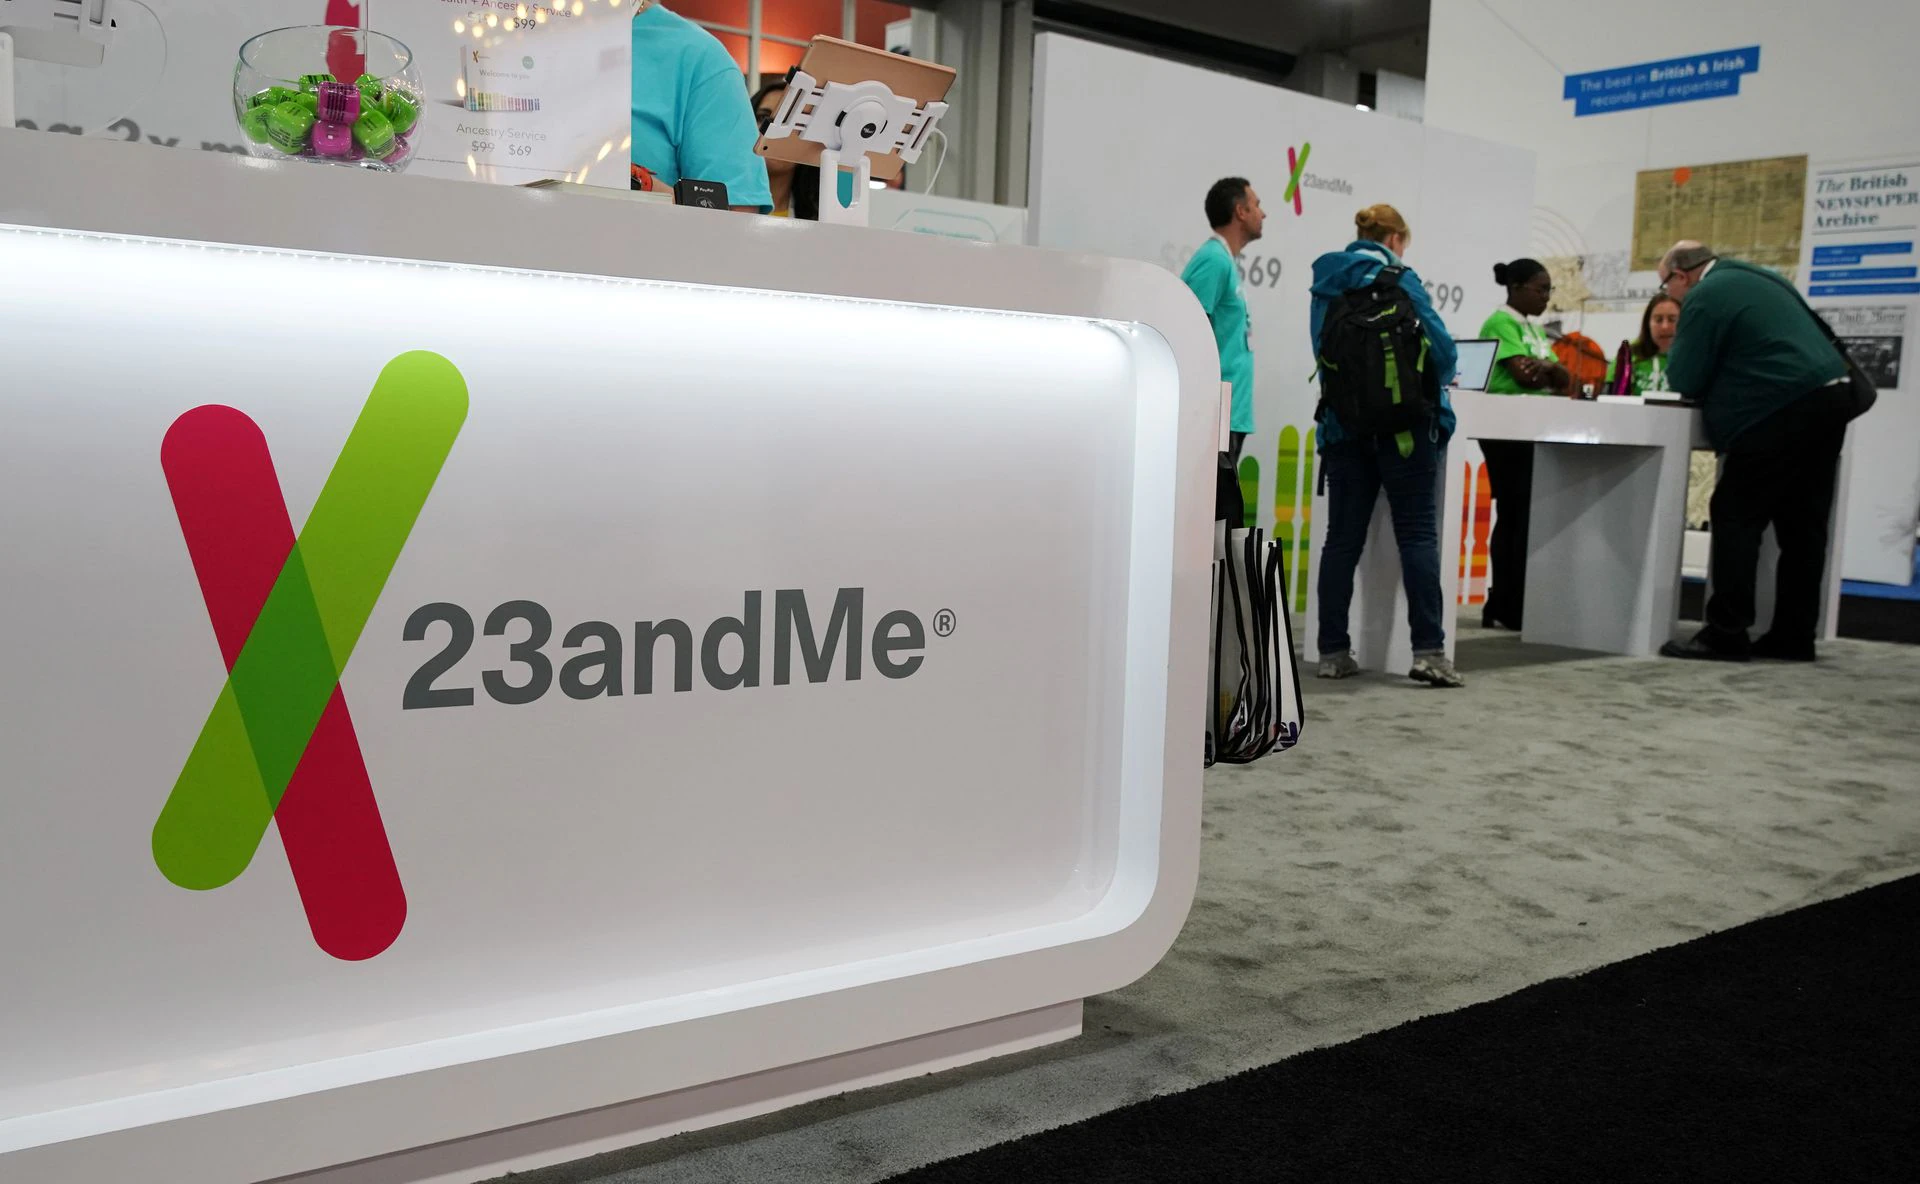 23andMe Implements Password Reset For Users Following Data Leak Incident